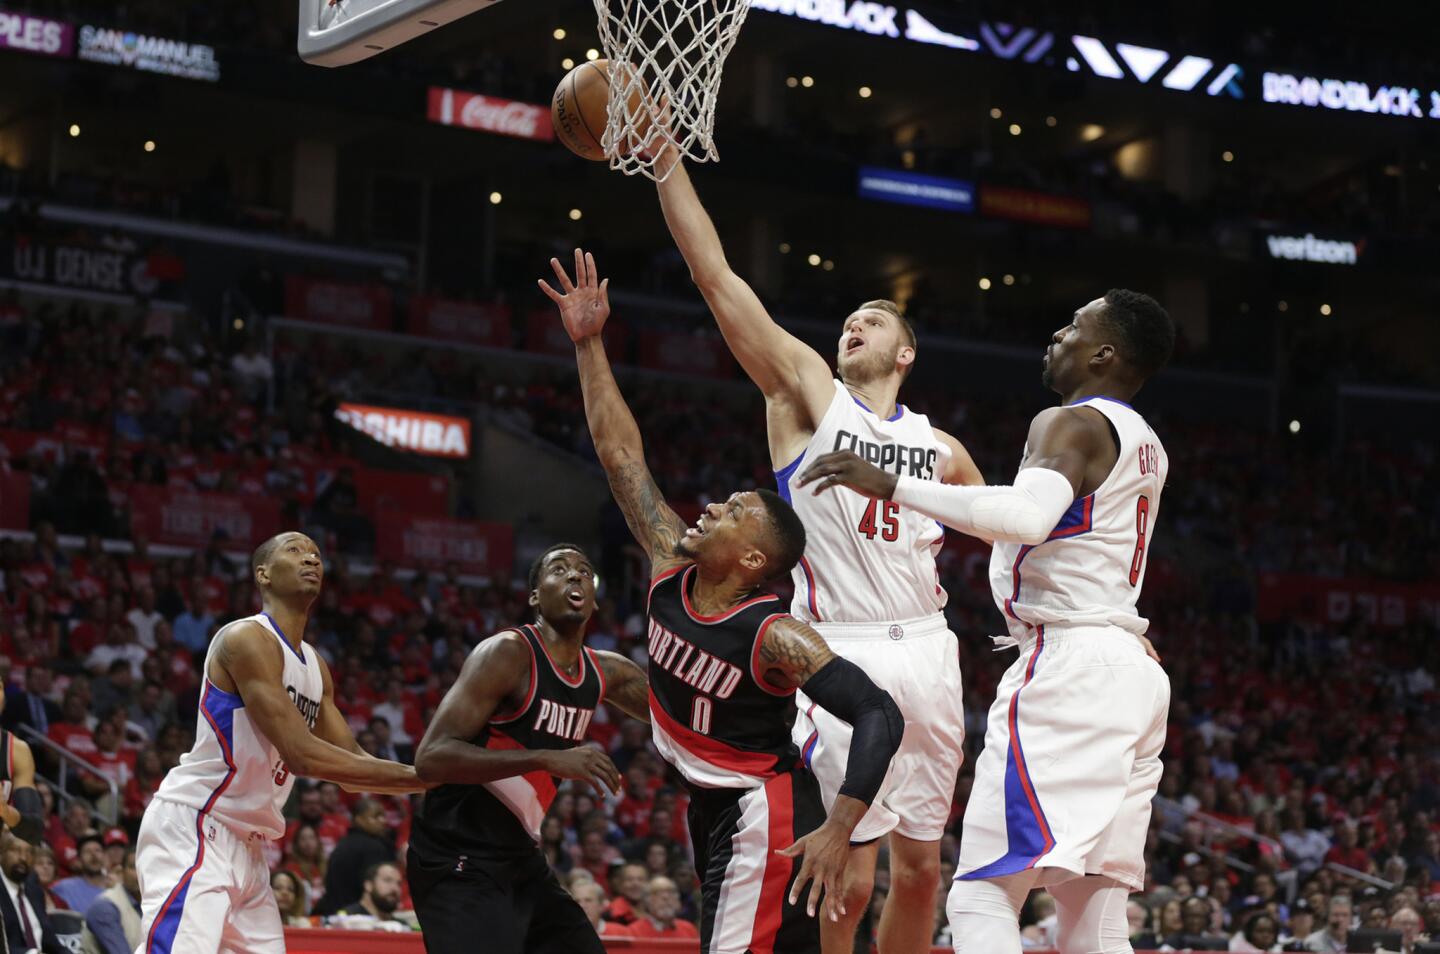 The reserve clause in Clippers' playoff wins: Backups have had a big role